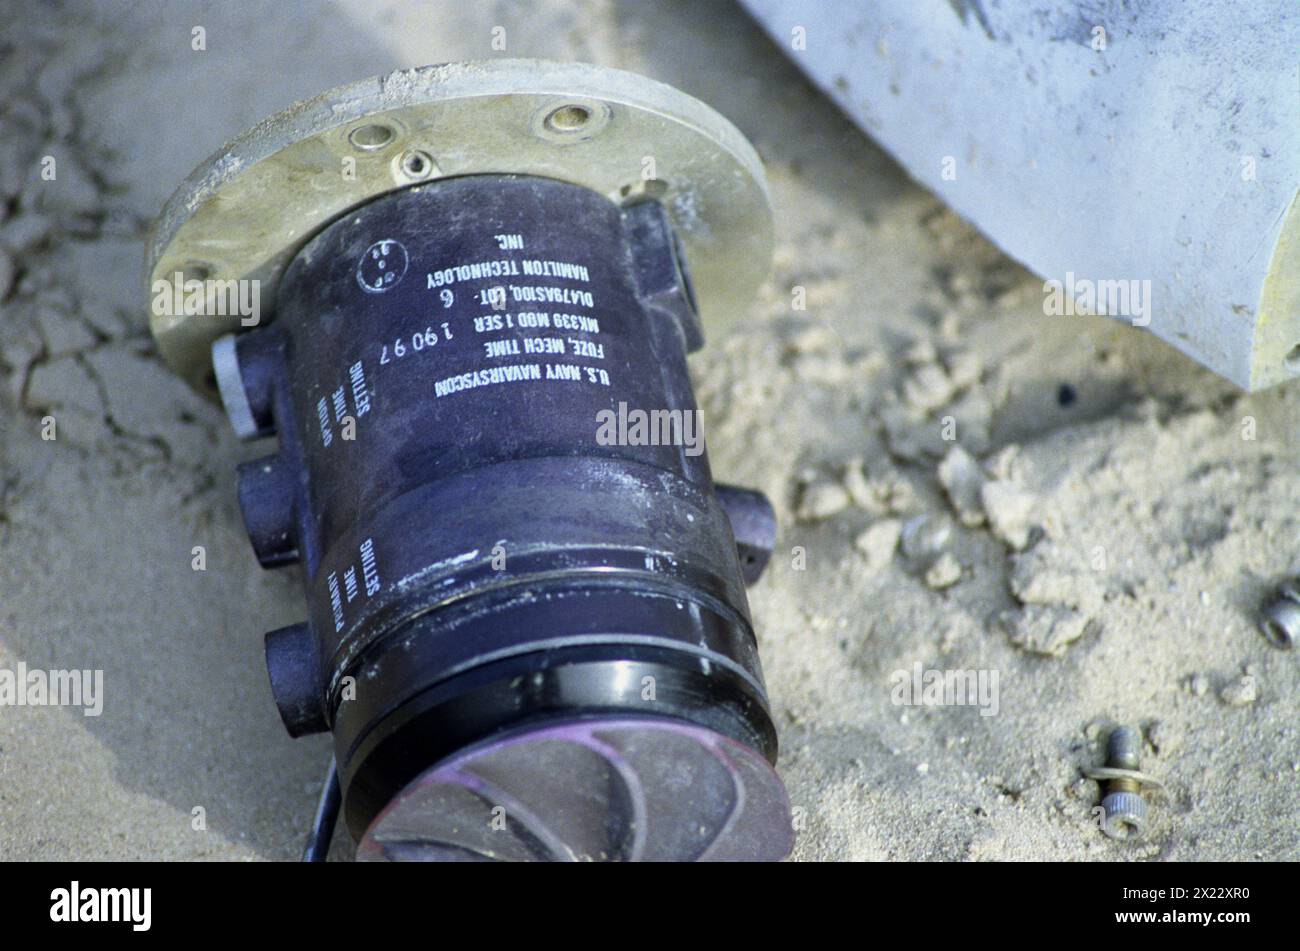 1st April 1991 An American Mk 339 Mod 1 fuse from a CBU-100 (Mk-20 Rockeye) cluster bomb, on the 'Highway of Death', west of Kuwait City on the main highway to Basra. Stock Photo